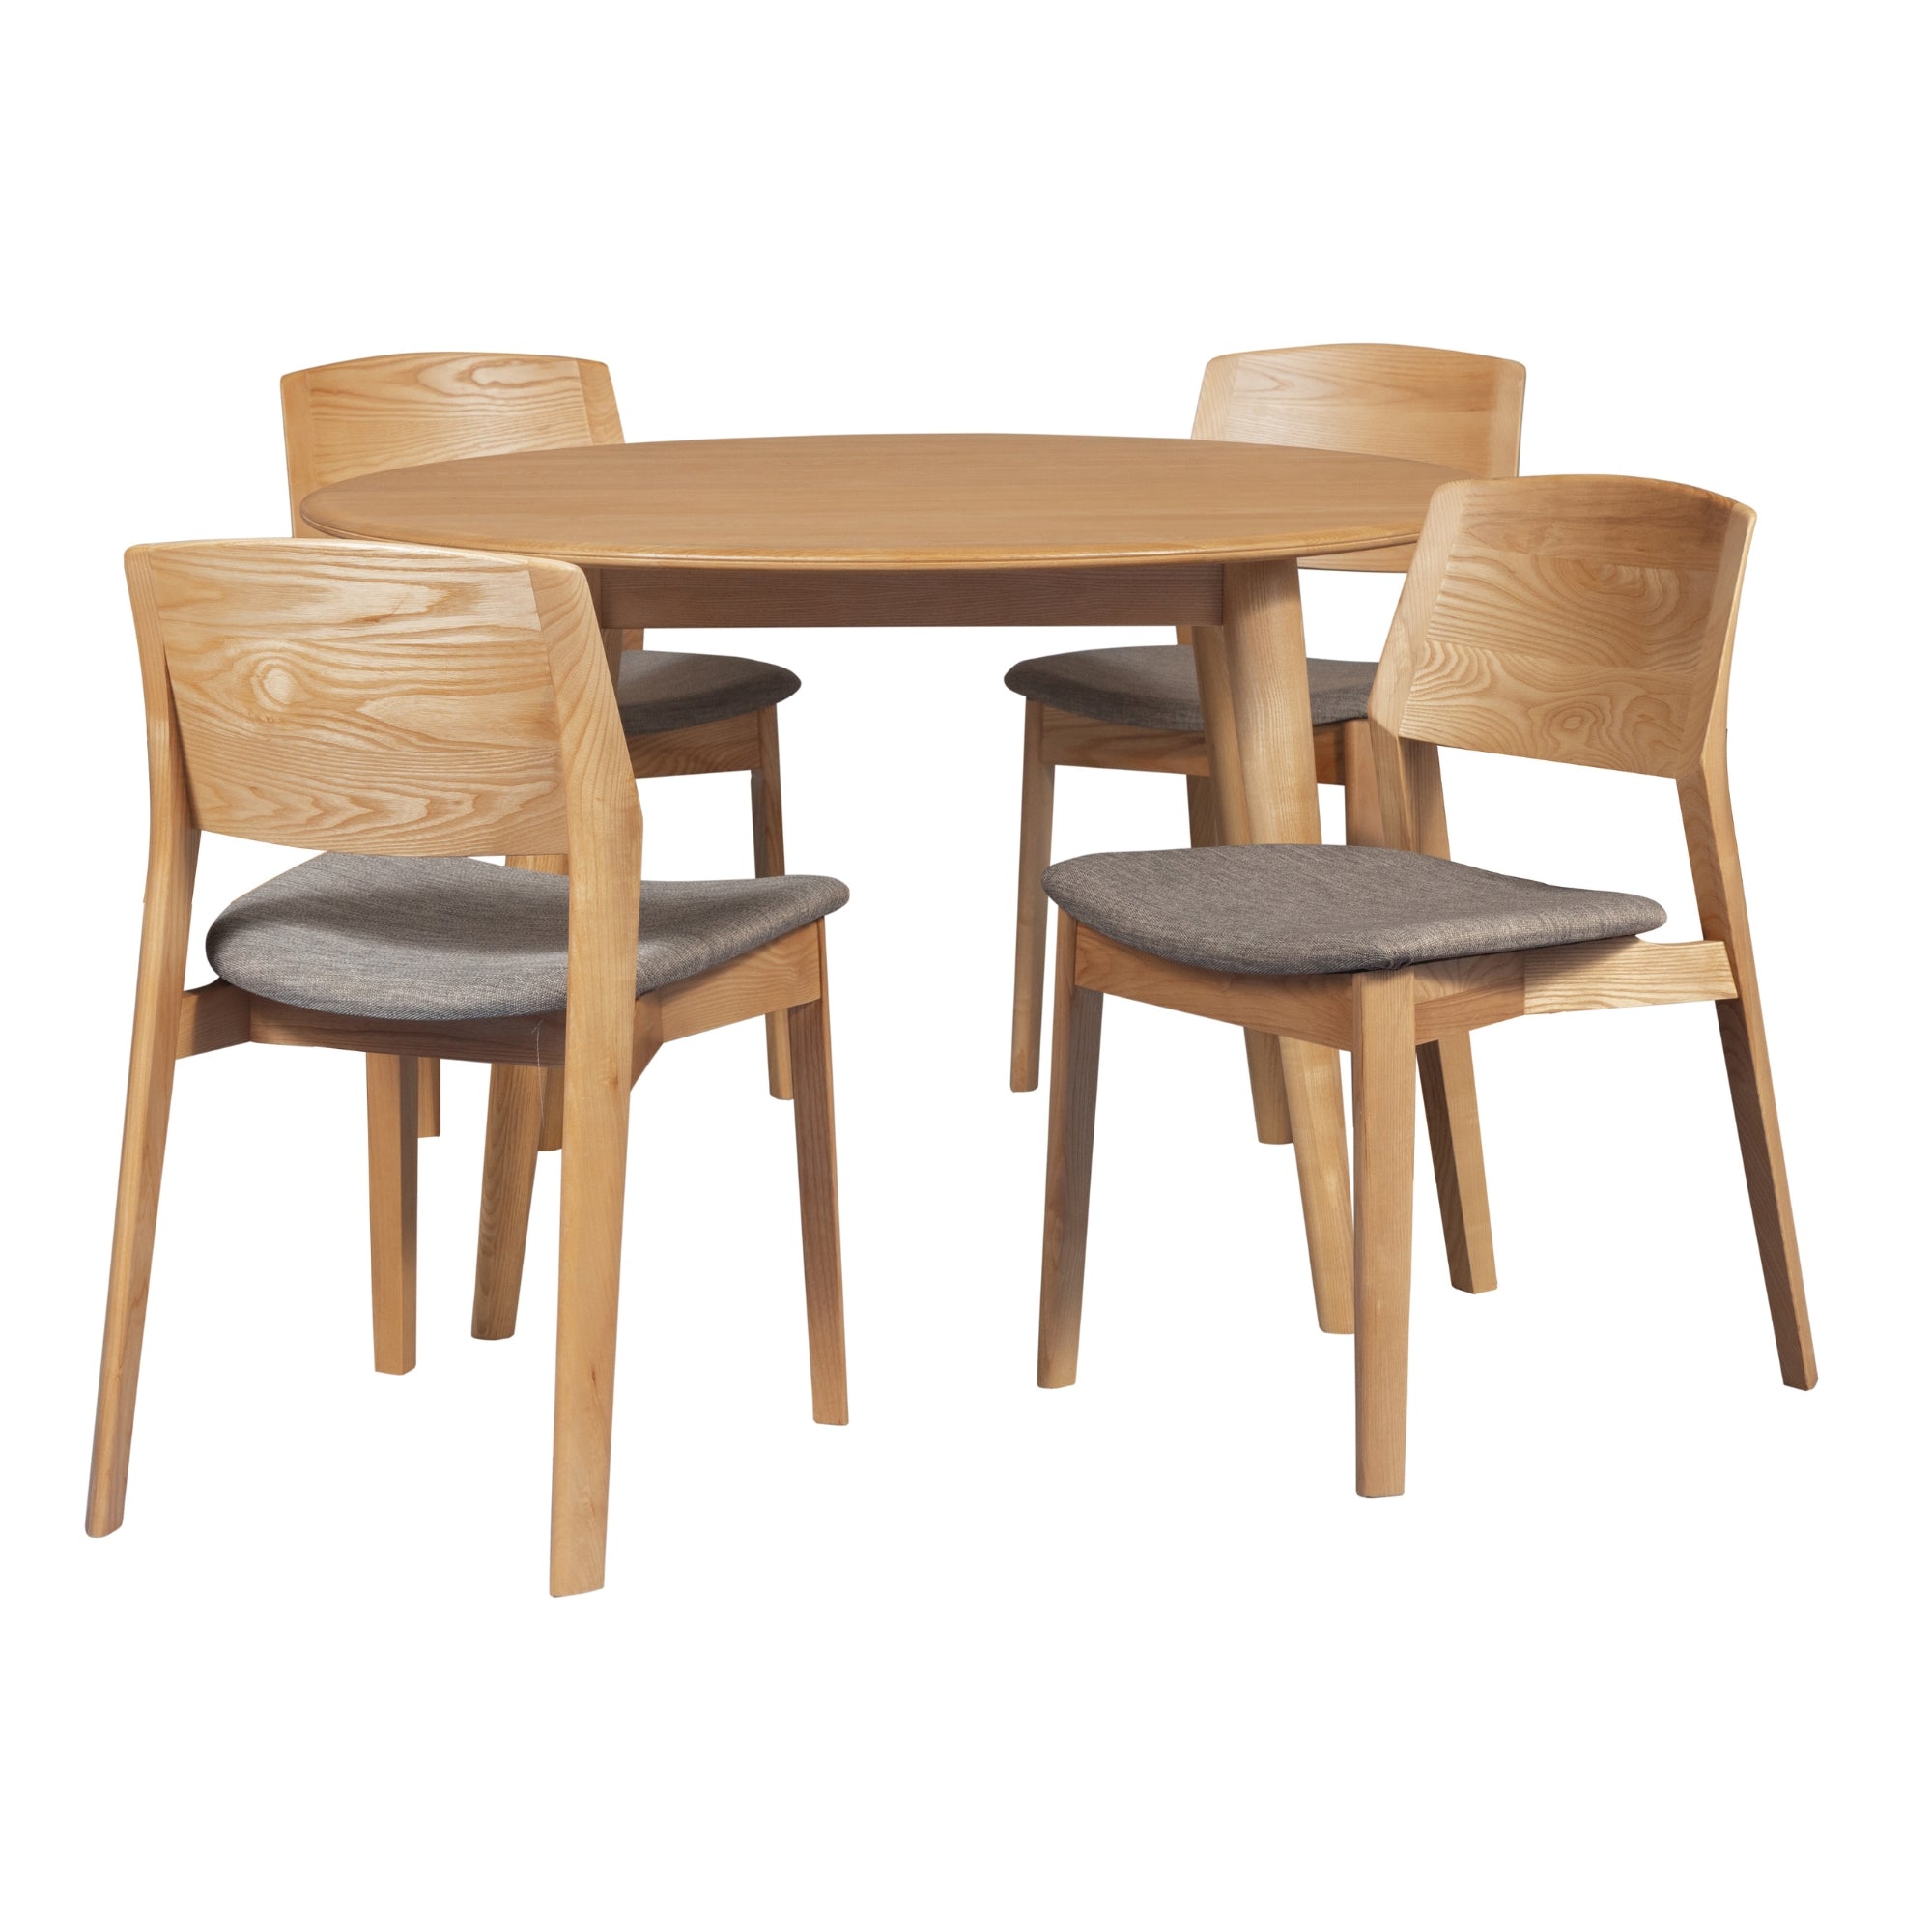 Solid Ash Wood 5pc Round Dining Table Set Oak, Fabric Chairs